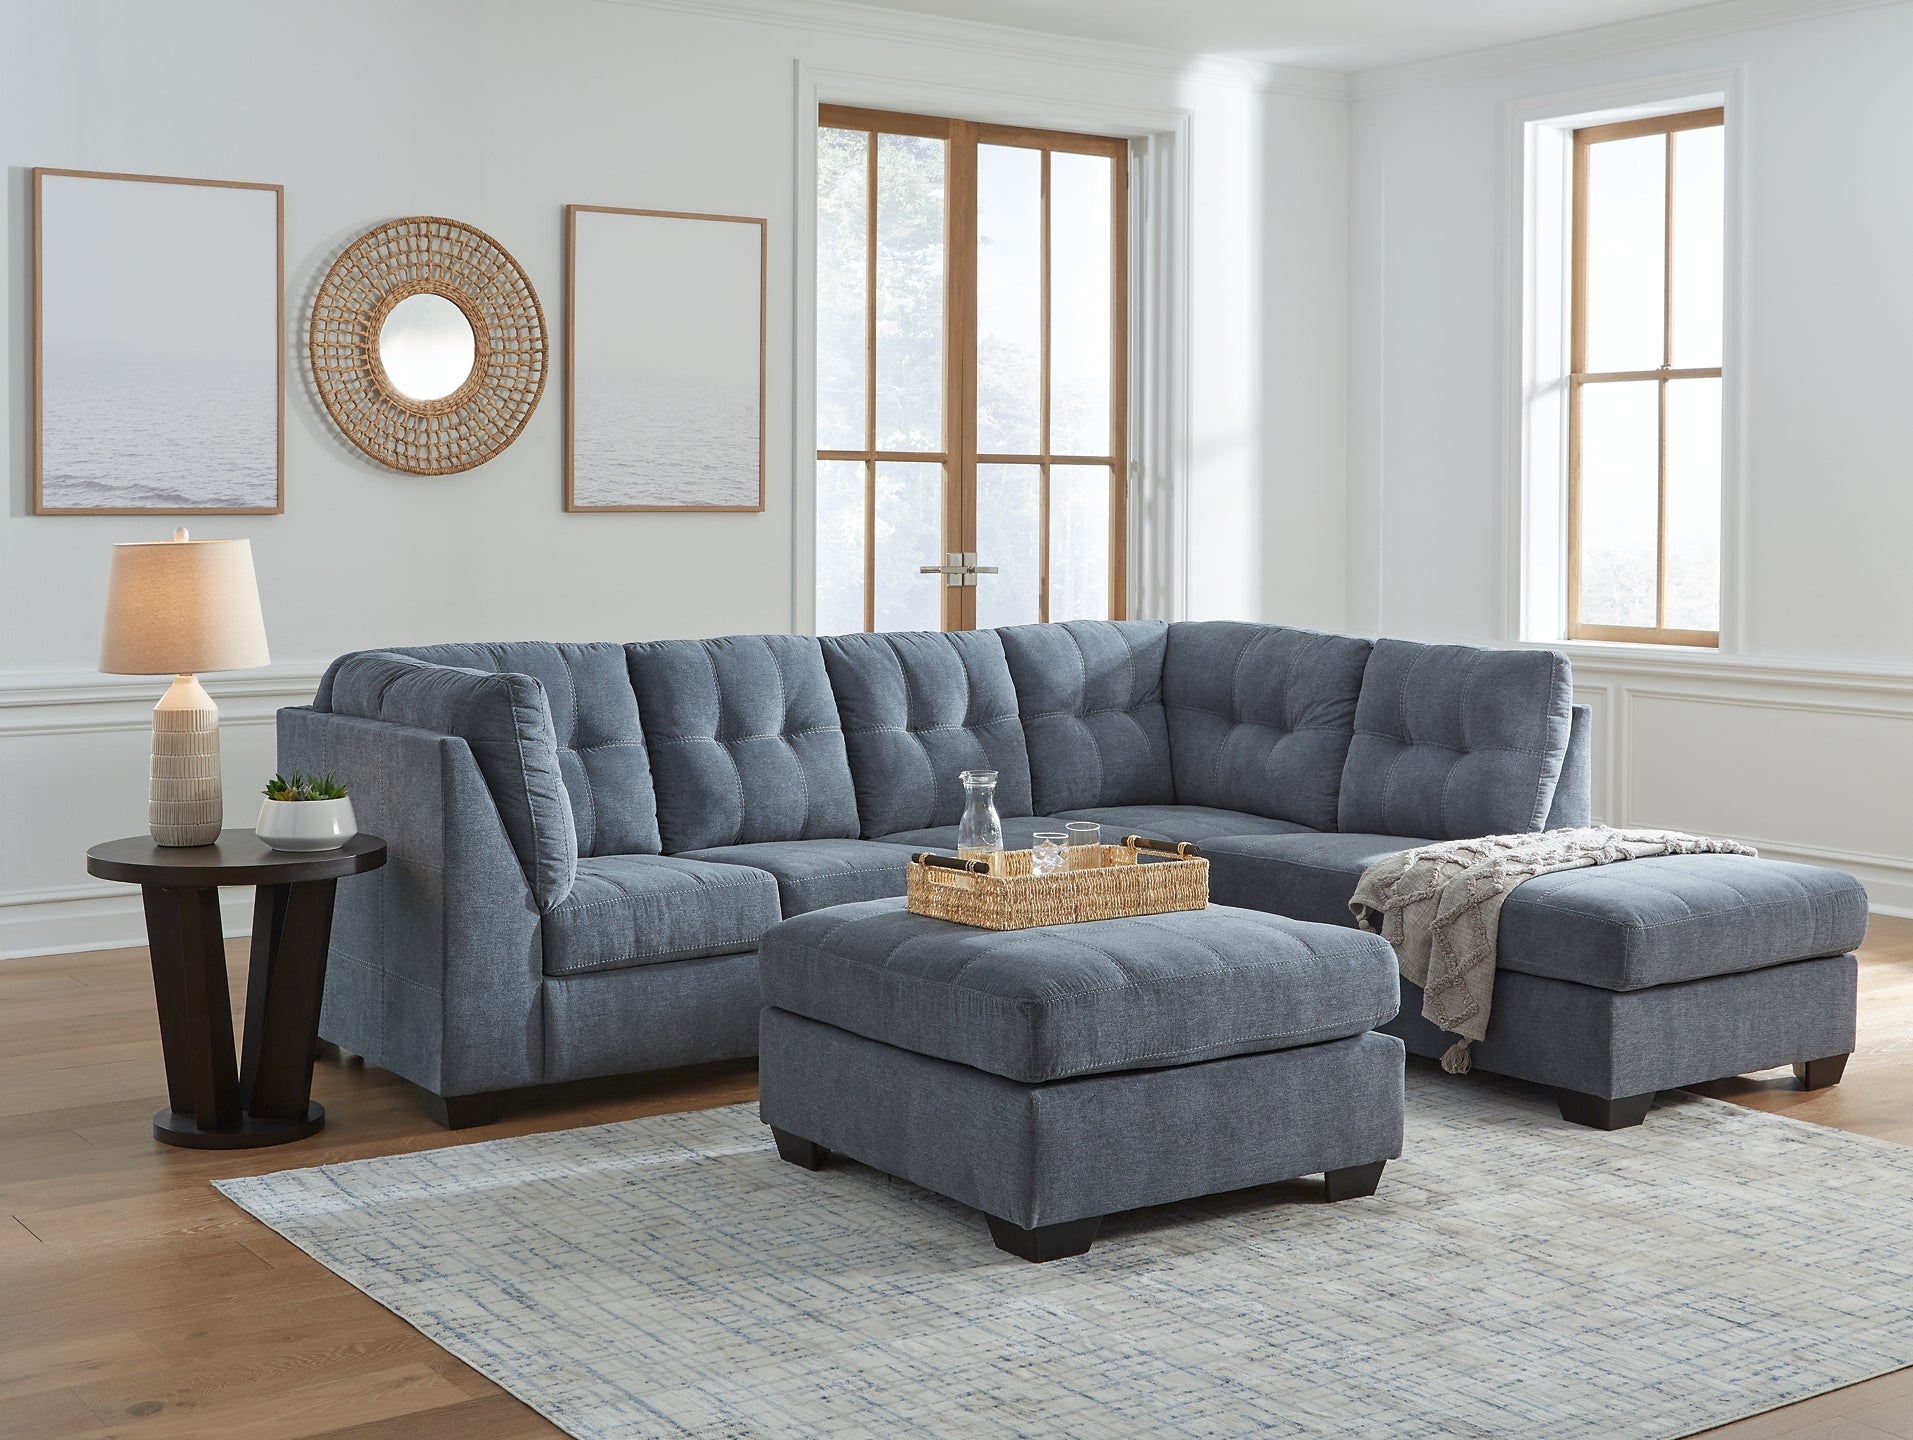 Marleton 2 Piece Sectional With Ottoman